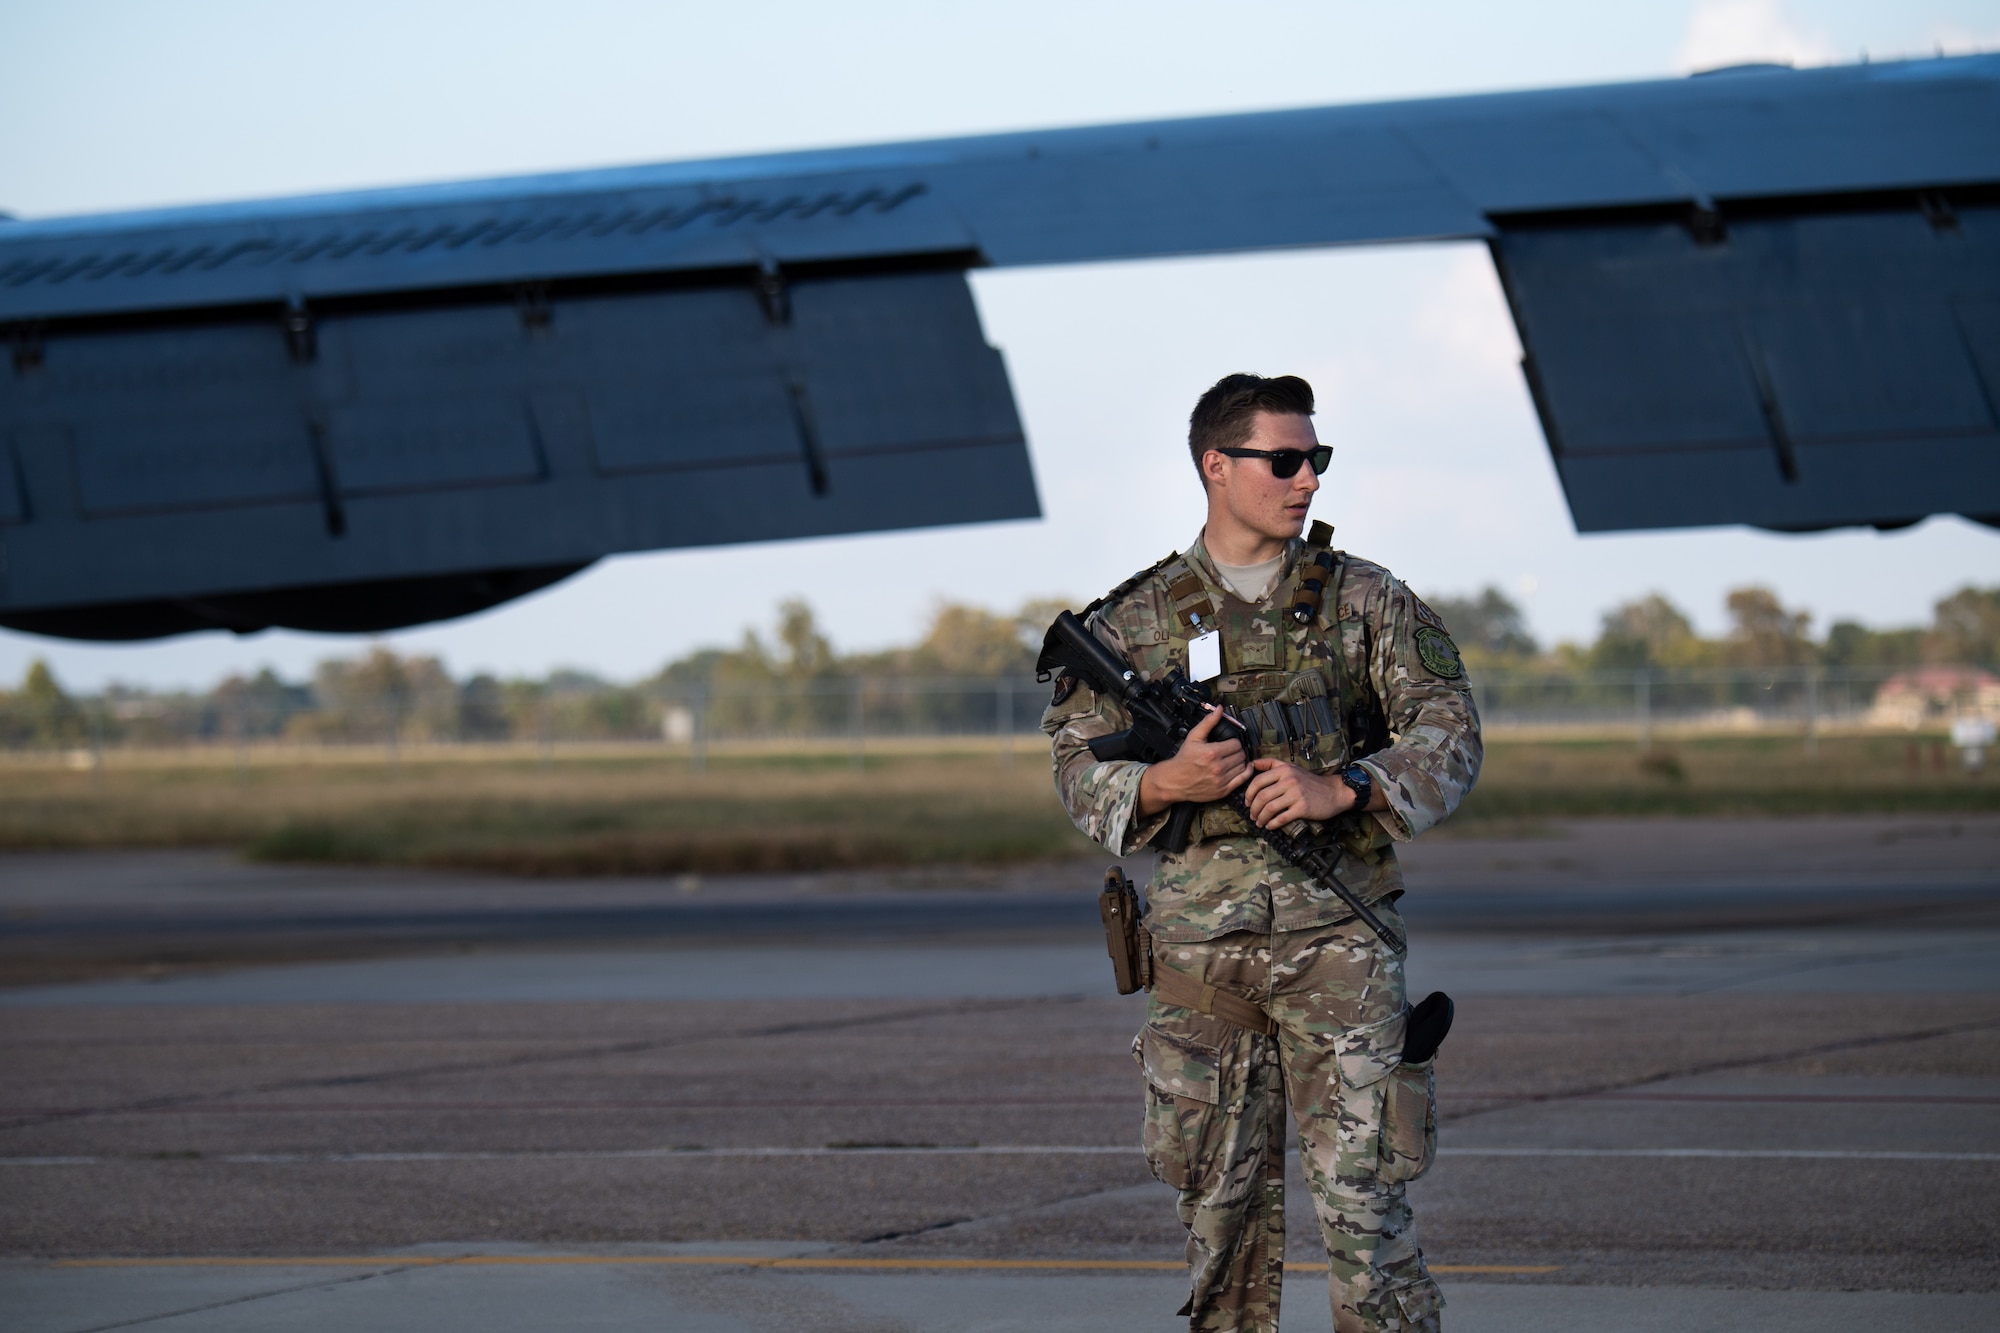 Airman 1st Class Jacob Oldfield, 2nd Security Forces Squadron entry controller, stands guard at an entry control point during Global Thunder 21 at Barksdale Air Force Base, La., Oct. 20, 2020. Exercises like GLOBAL THUNDER involve extensive planning and coordination to provide unique training opportunities for assigned units and forces. (U.S. Air Force photo by Airman 1st Class Jacob B. Wrightsman)